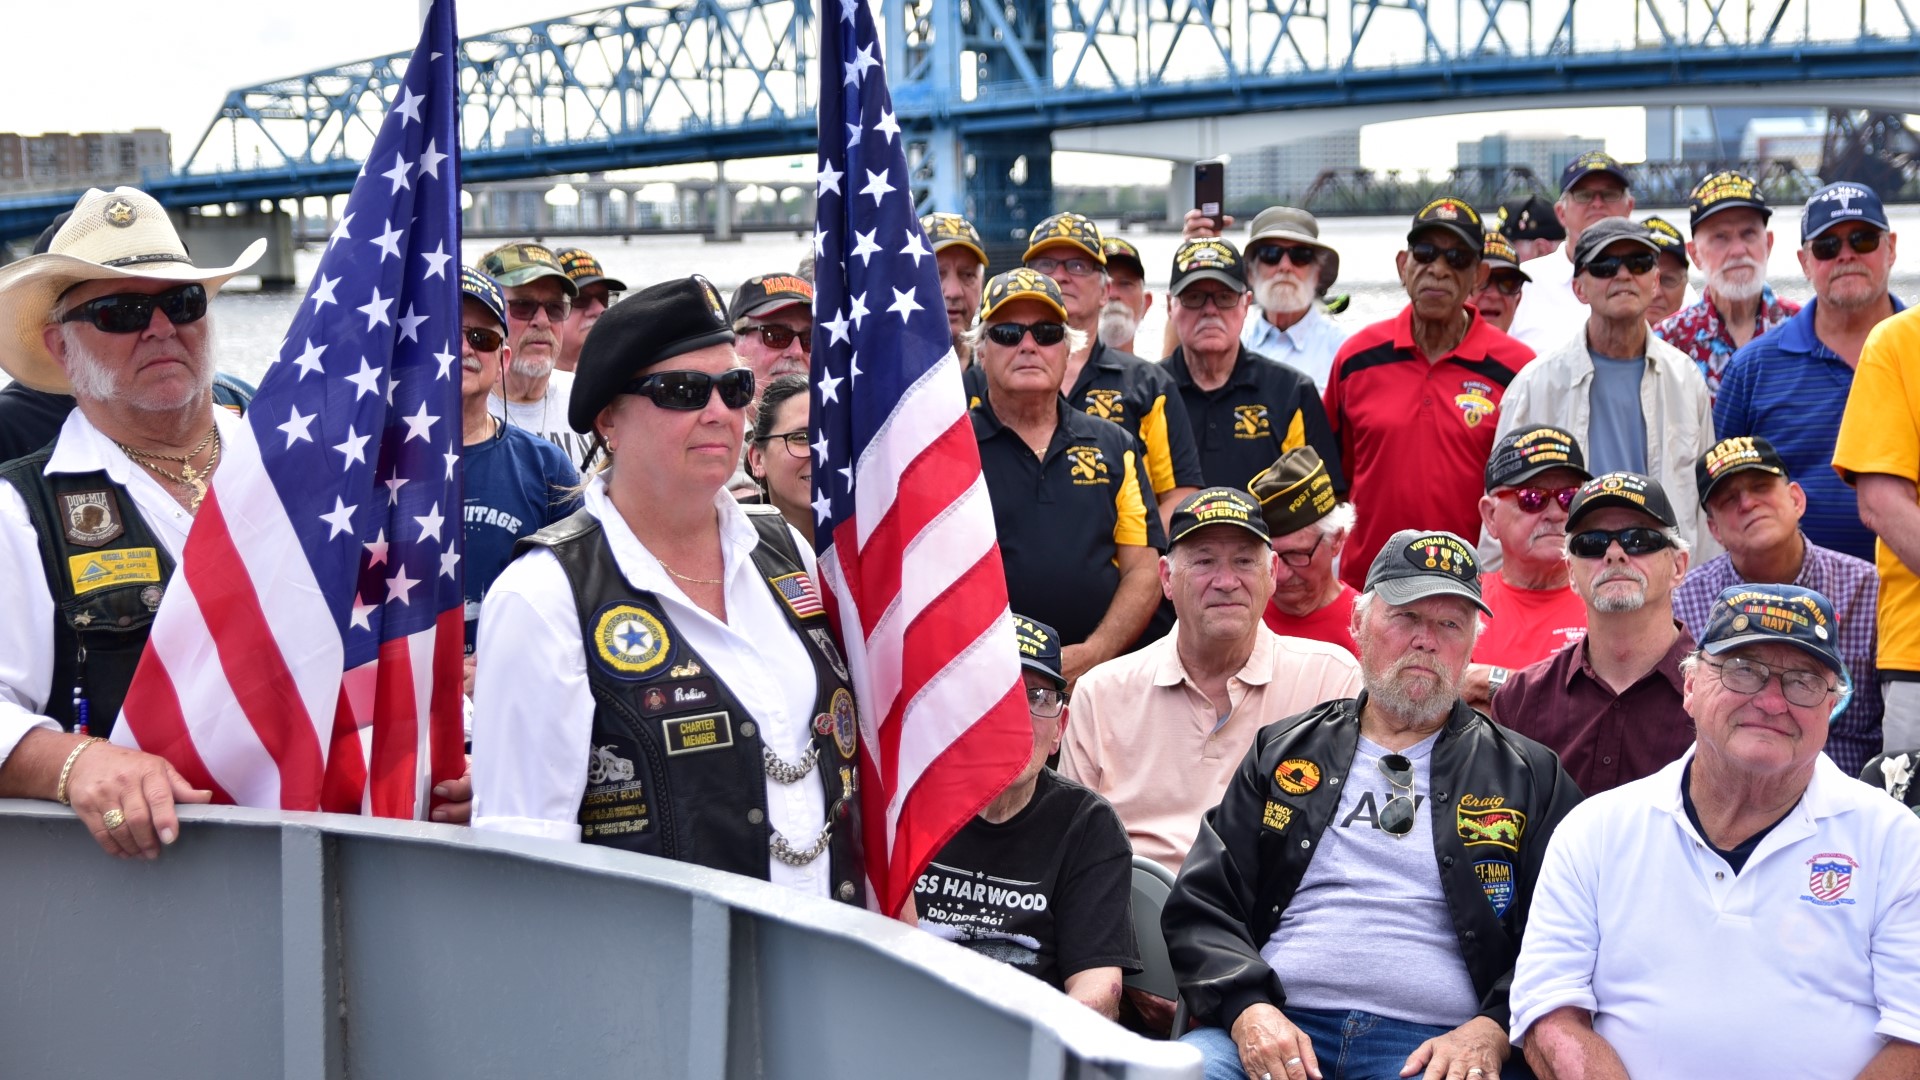 In this Special Report, On Your Side's Jeannie Blaylock and Lewis Turner tell the stories of Vietnam veterans paying respects to their service.